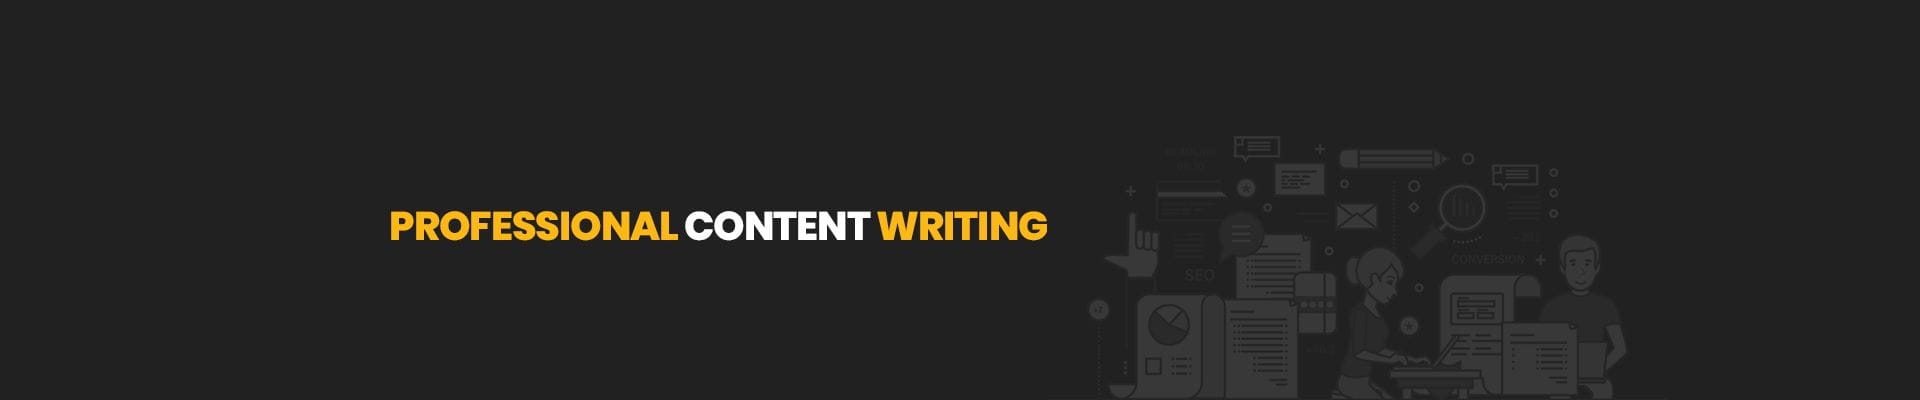 Professional Website Content Writing | Bloomtools York